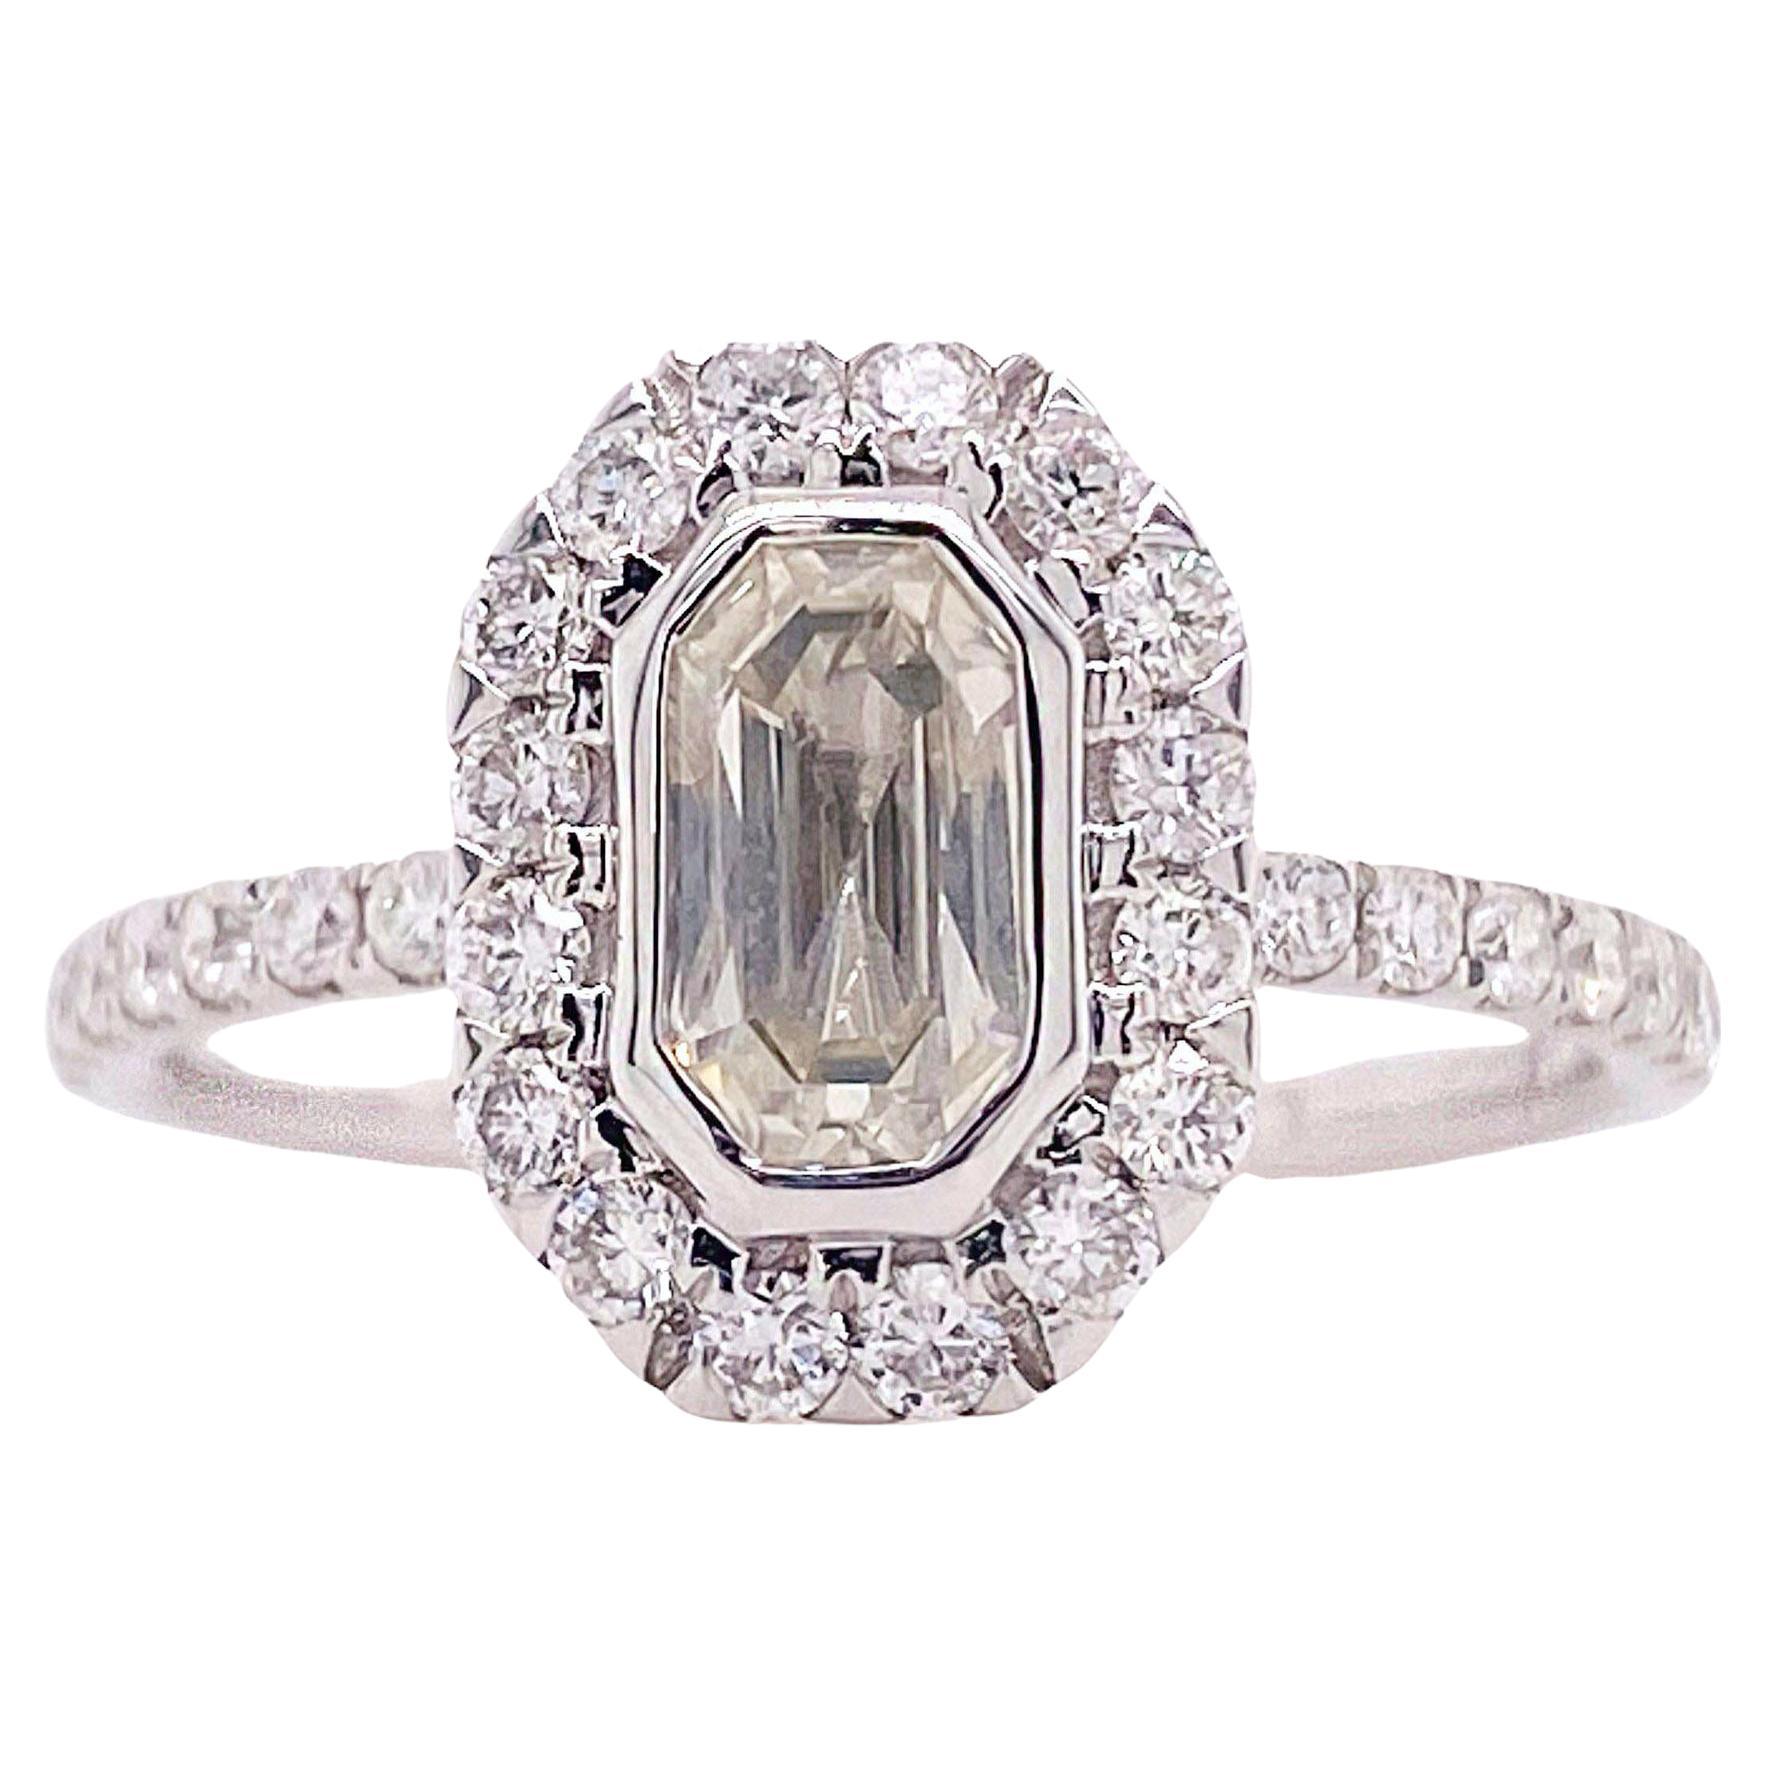 1.25 Carat Emerald Cut Diamond & French Set Diamond Halo Engagement Ring in 18k For Sale